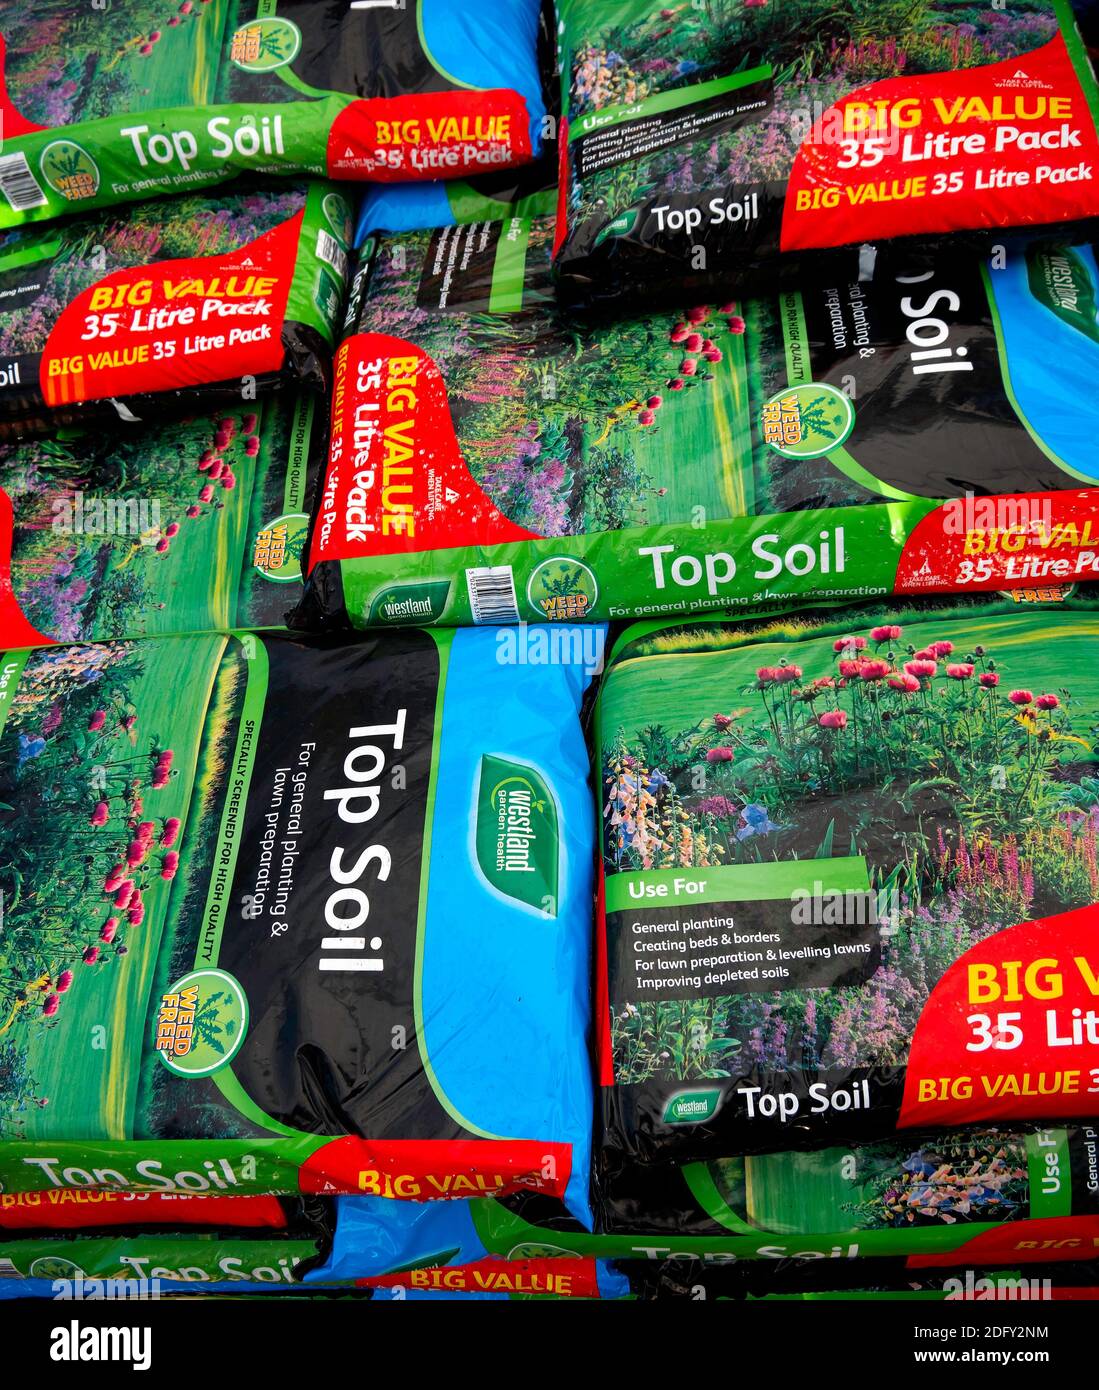 A stack of bags of Westland Top Soil in a garden centre Stock Photo